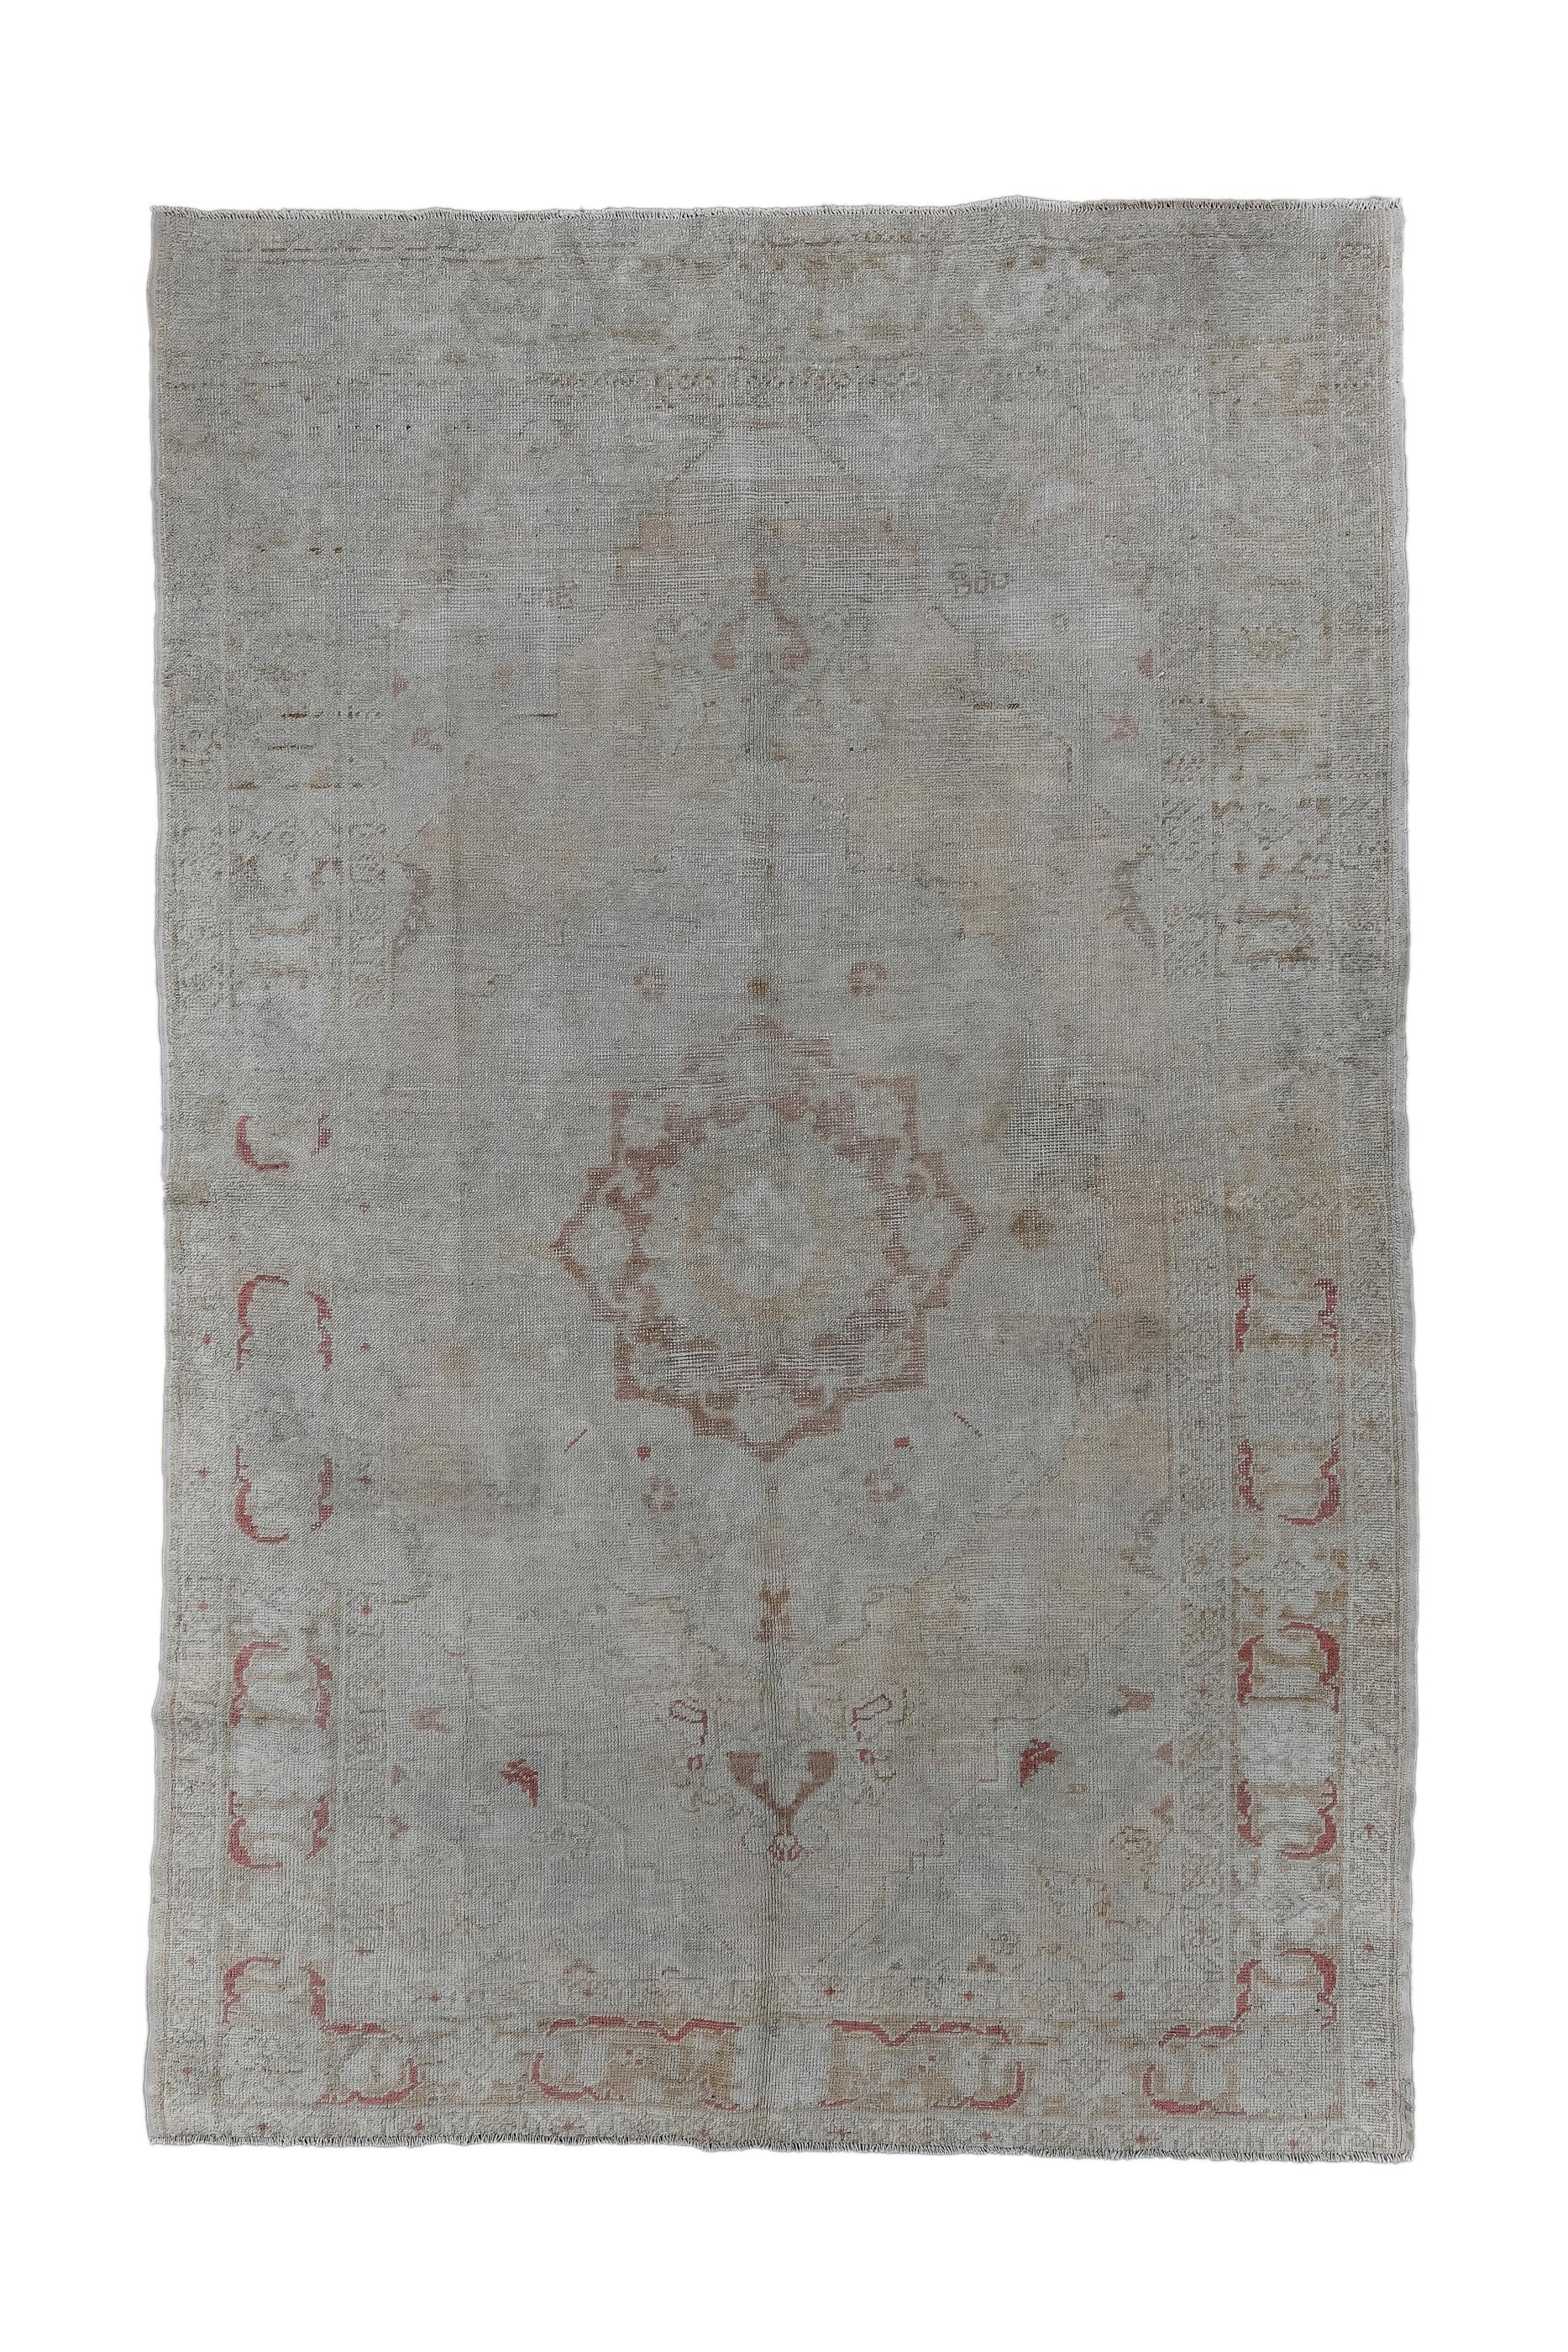 This softly-toned, large Anatolian scatter presents a brown octogramme medallion, with internal radiating flowers, and distant pendants.  Flowers are scattered and floating in the oatmeal field. Buff border interlocking beige and slate grey leaves.